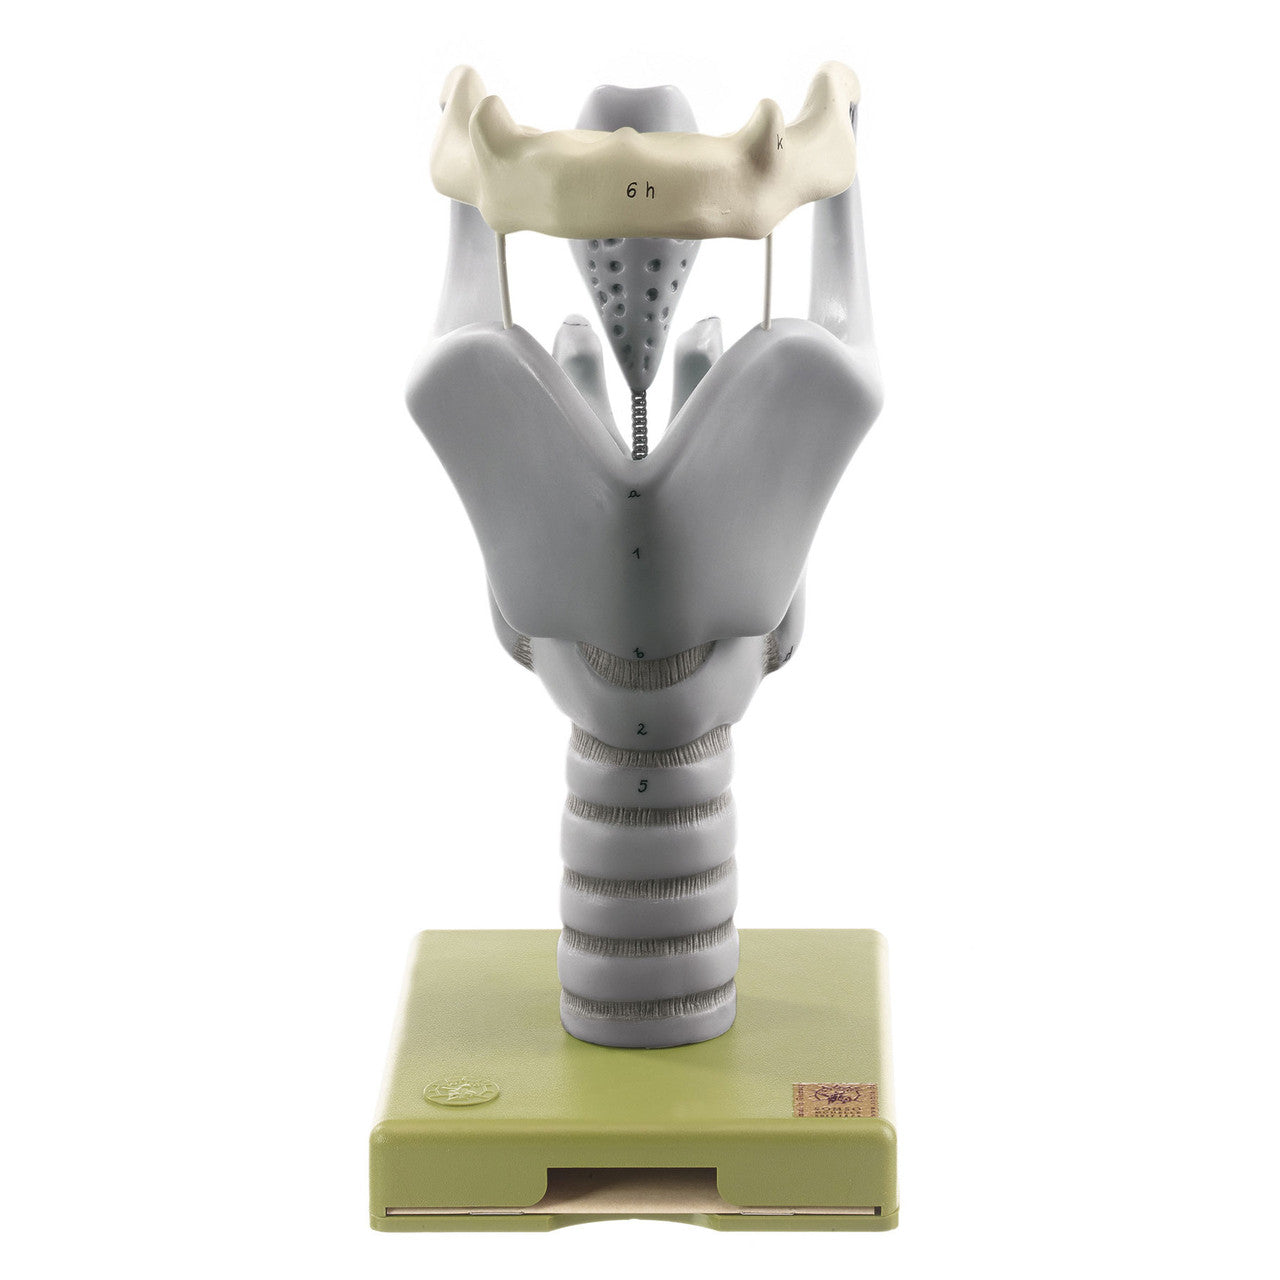 Cartilages of the Larynx Somso Gs 6